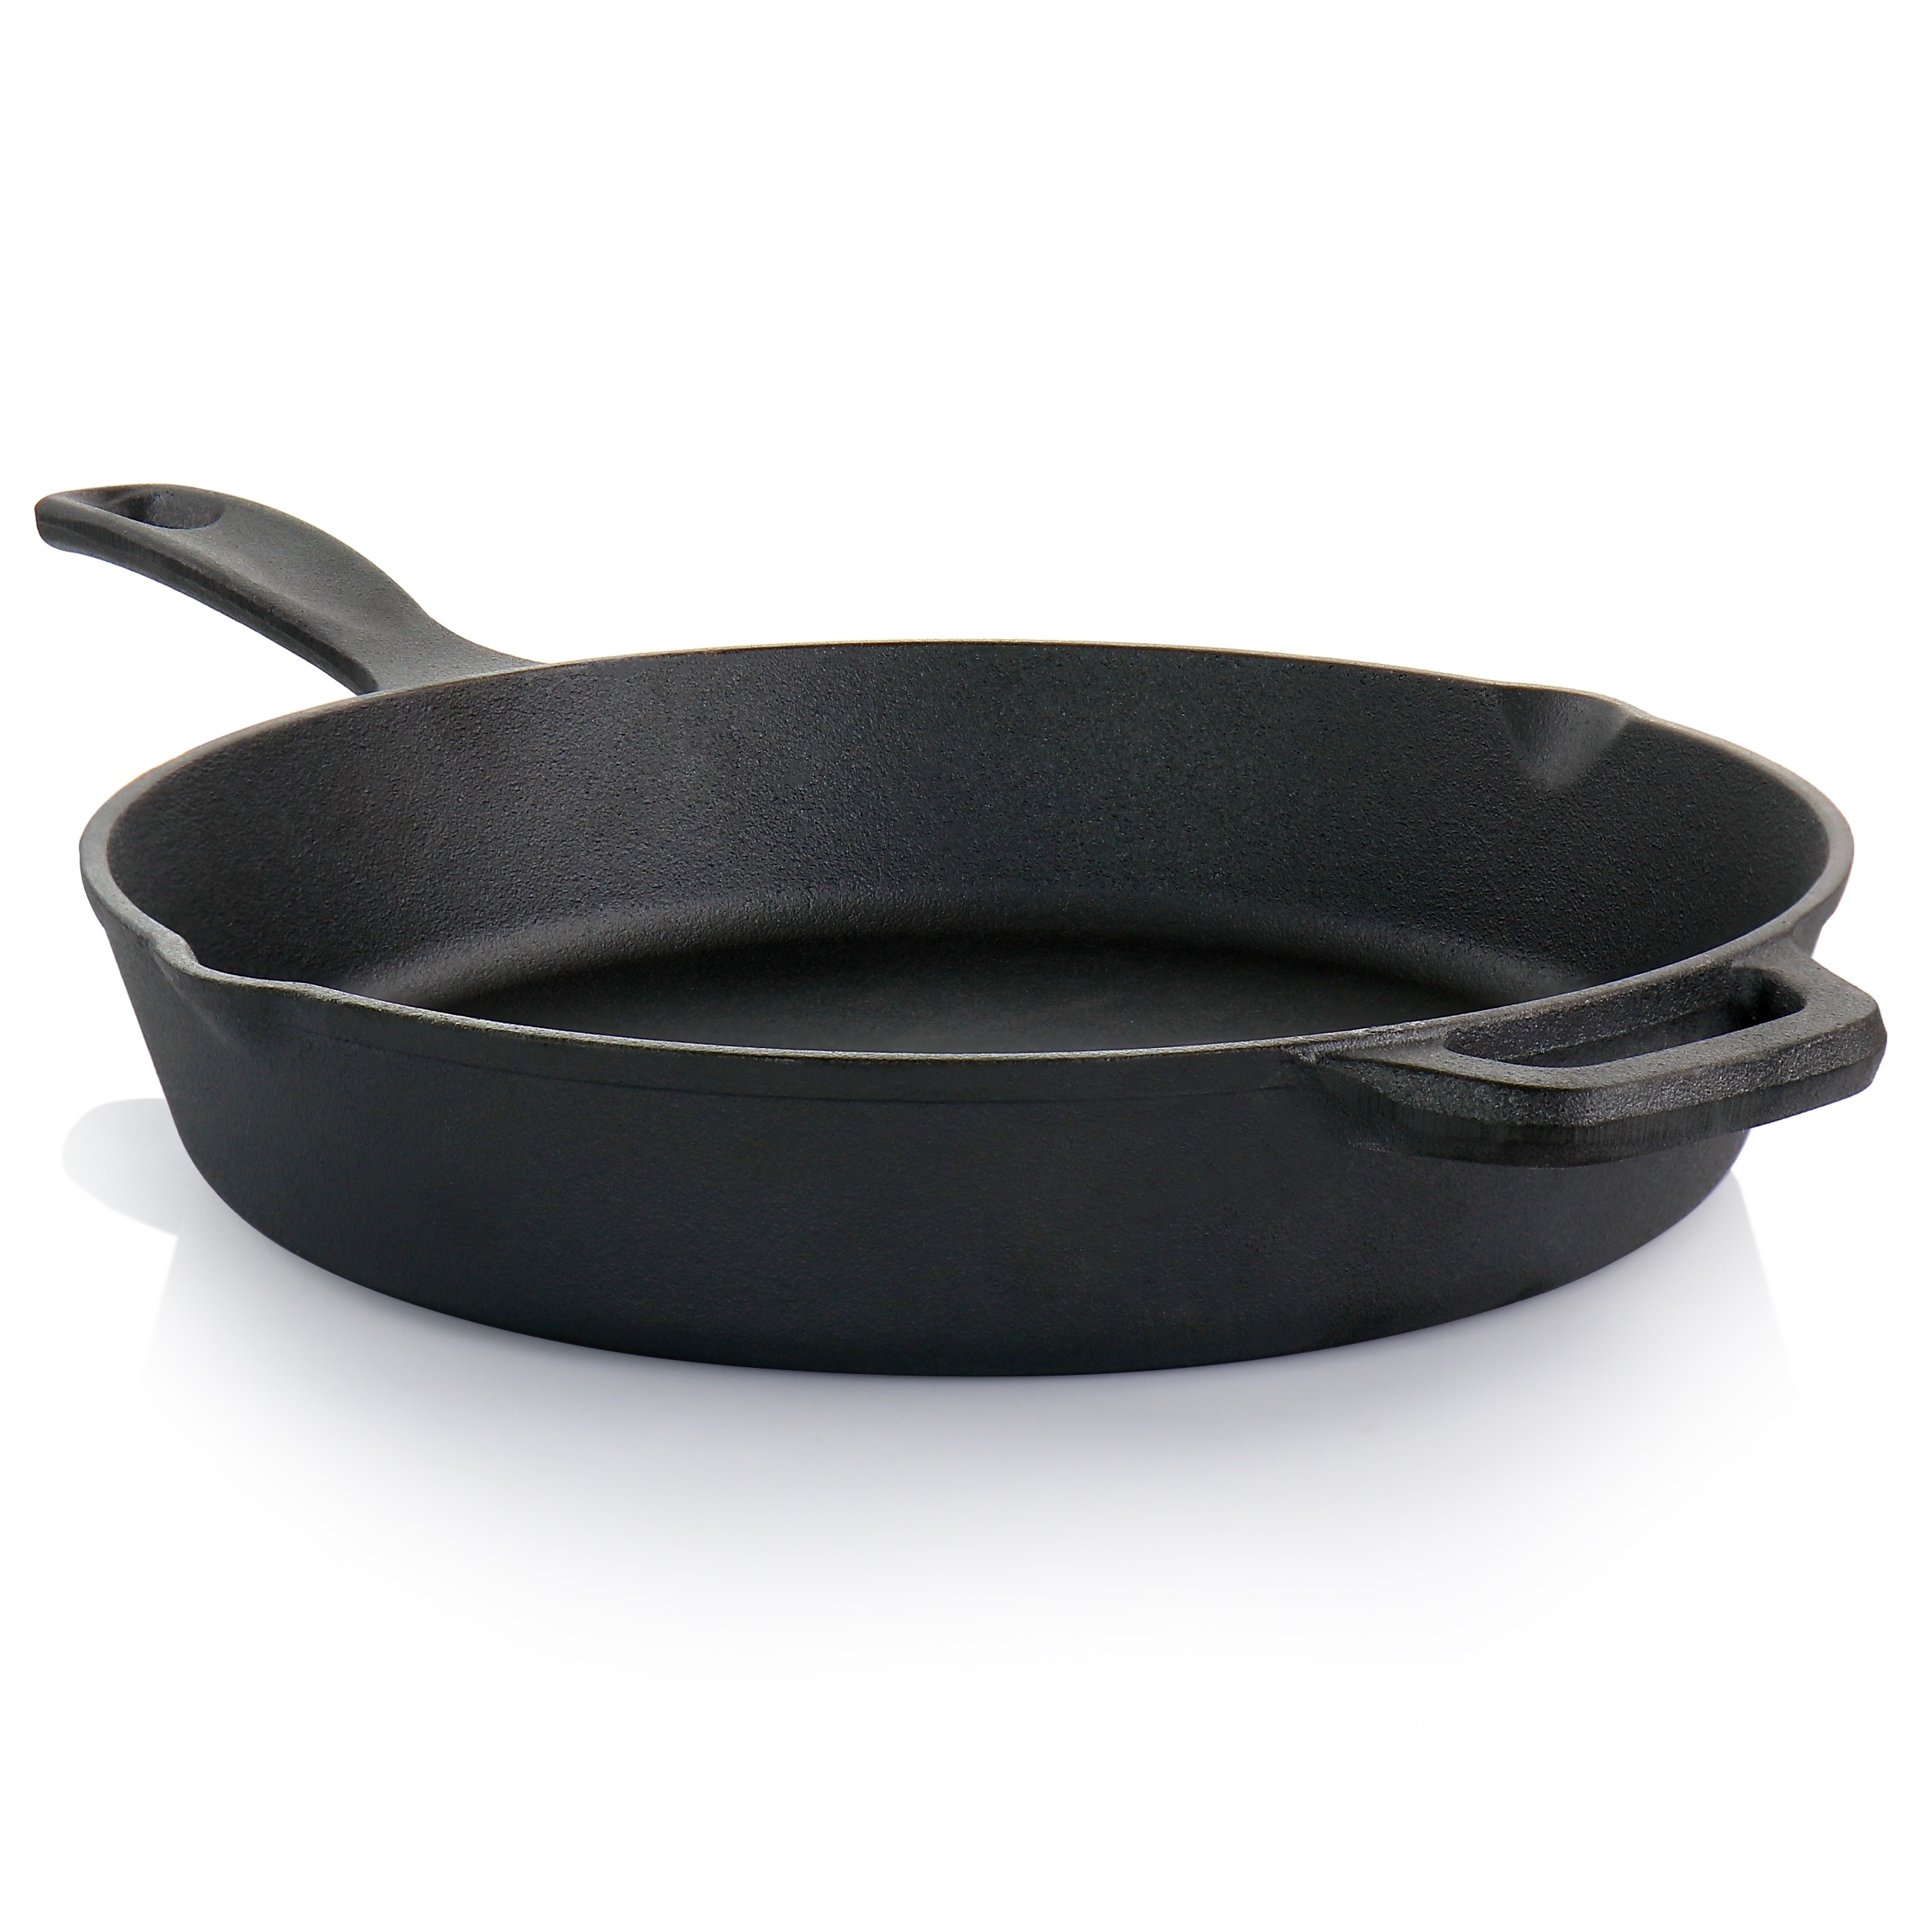 https://ak1.ostkcdn.com/images/products/is/images/direct/fdd88c9255f01b013143637faa013609974c3604/Oster-Castaway-12-Inch-Cast-Iron-Round-Frying-Pan-with-Dual-Spouts.jpg